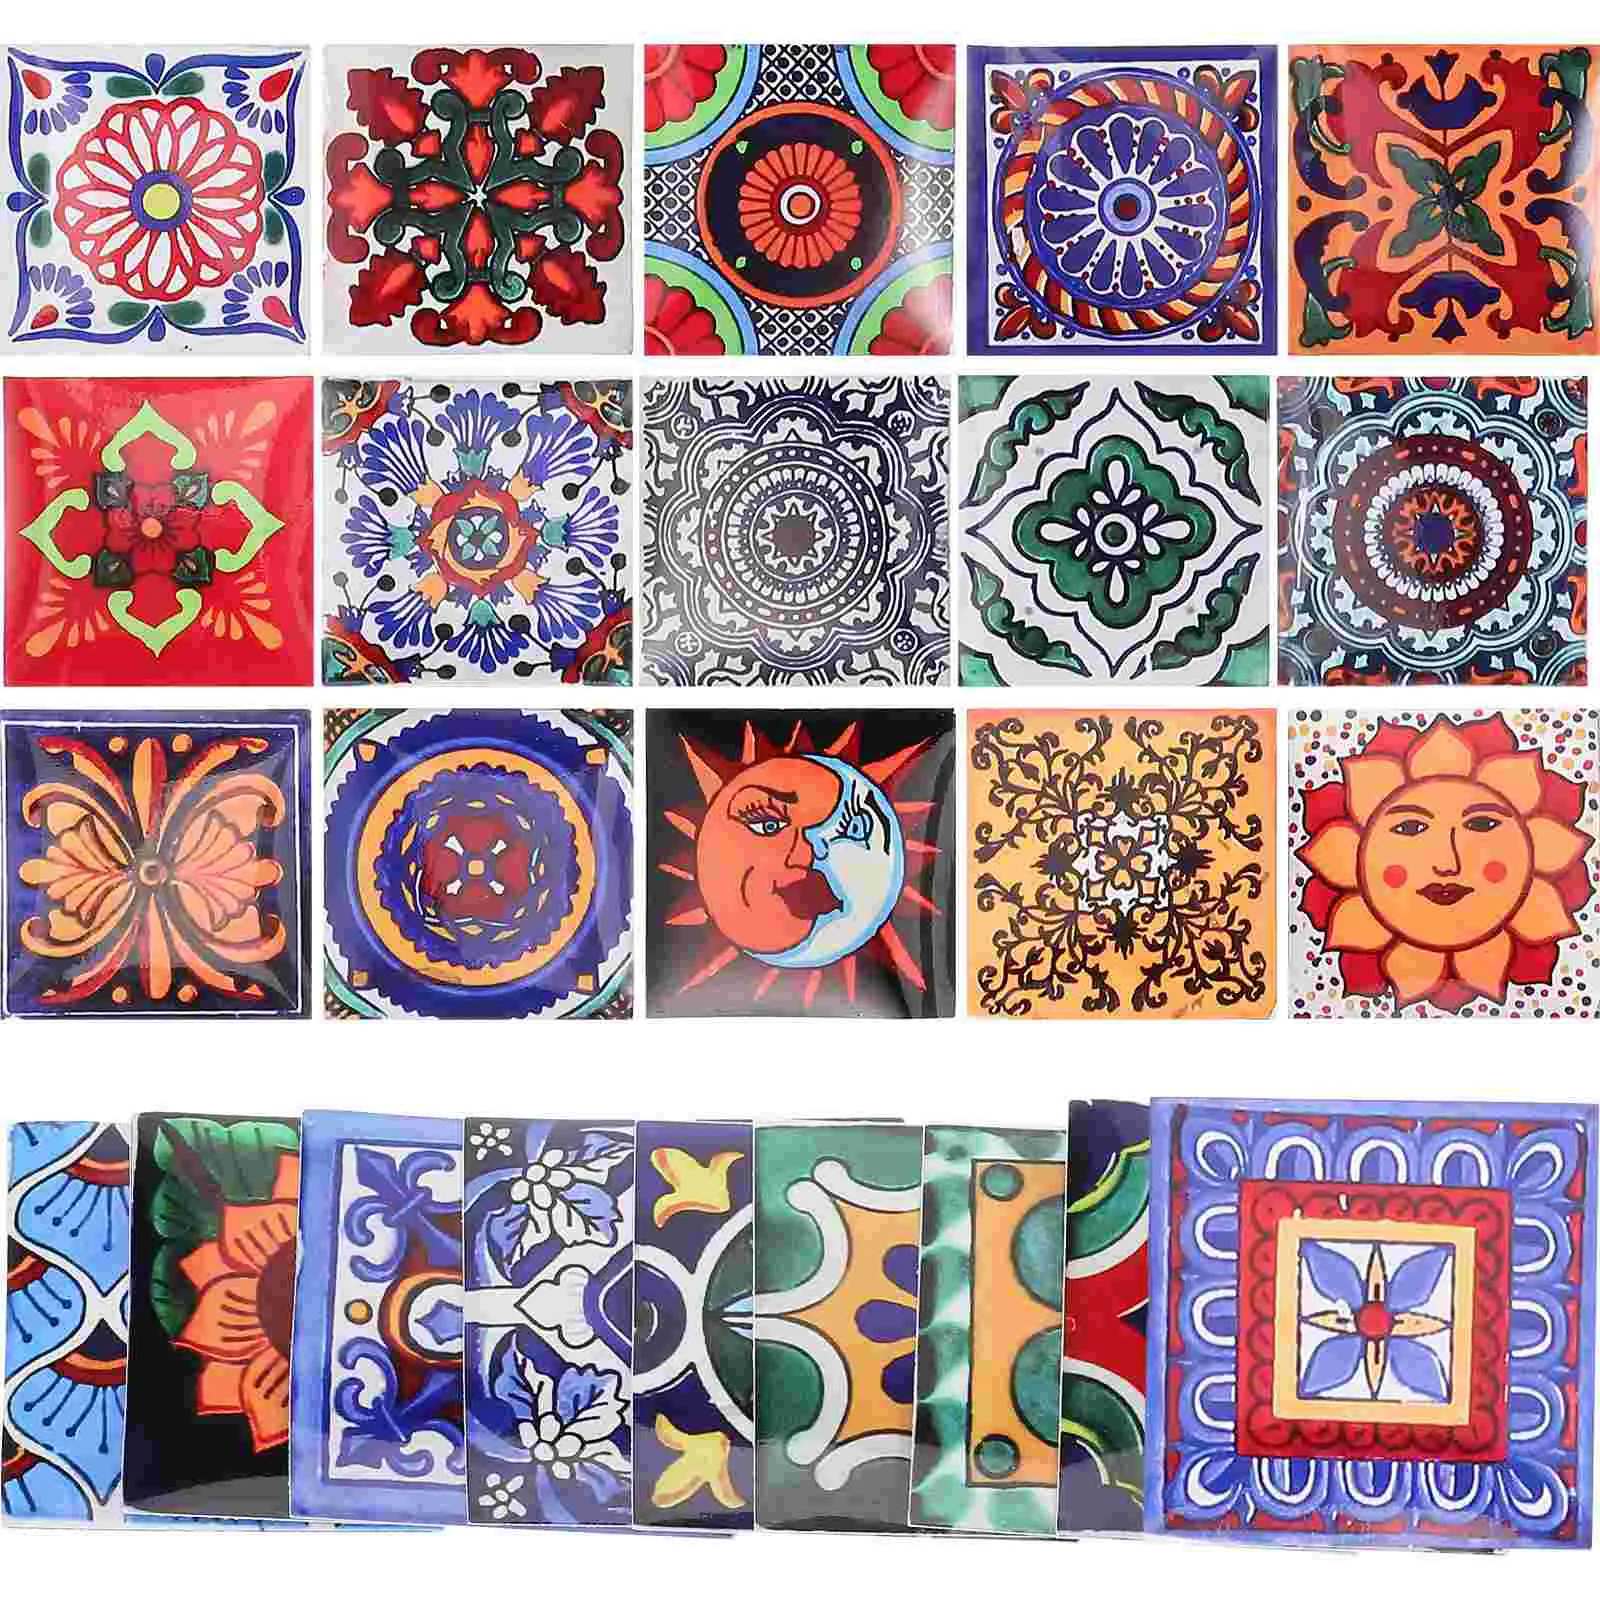 

24 Sheets Vintage Tile Stickers Peel and Bathroom Backsplash Waterproof Moroccan Decor Removable for Wall Pvc Floor Decals